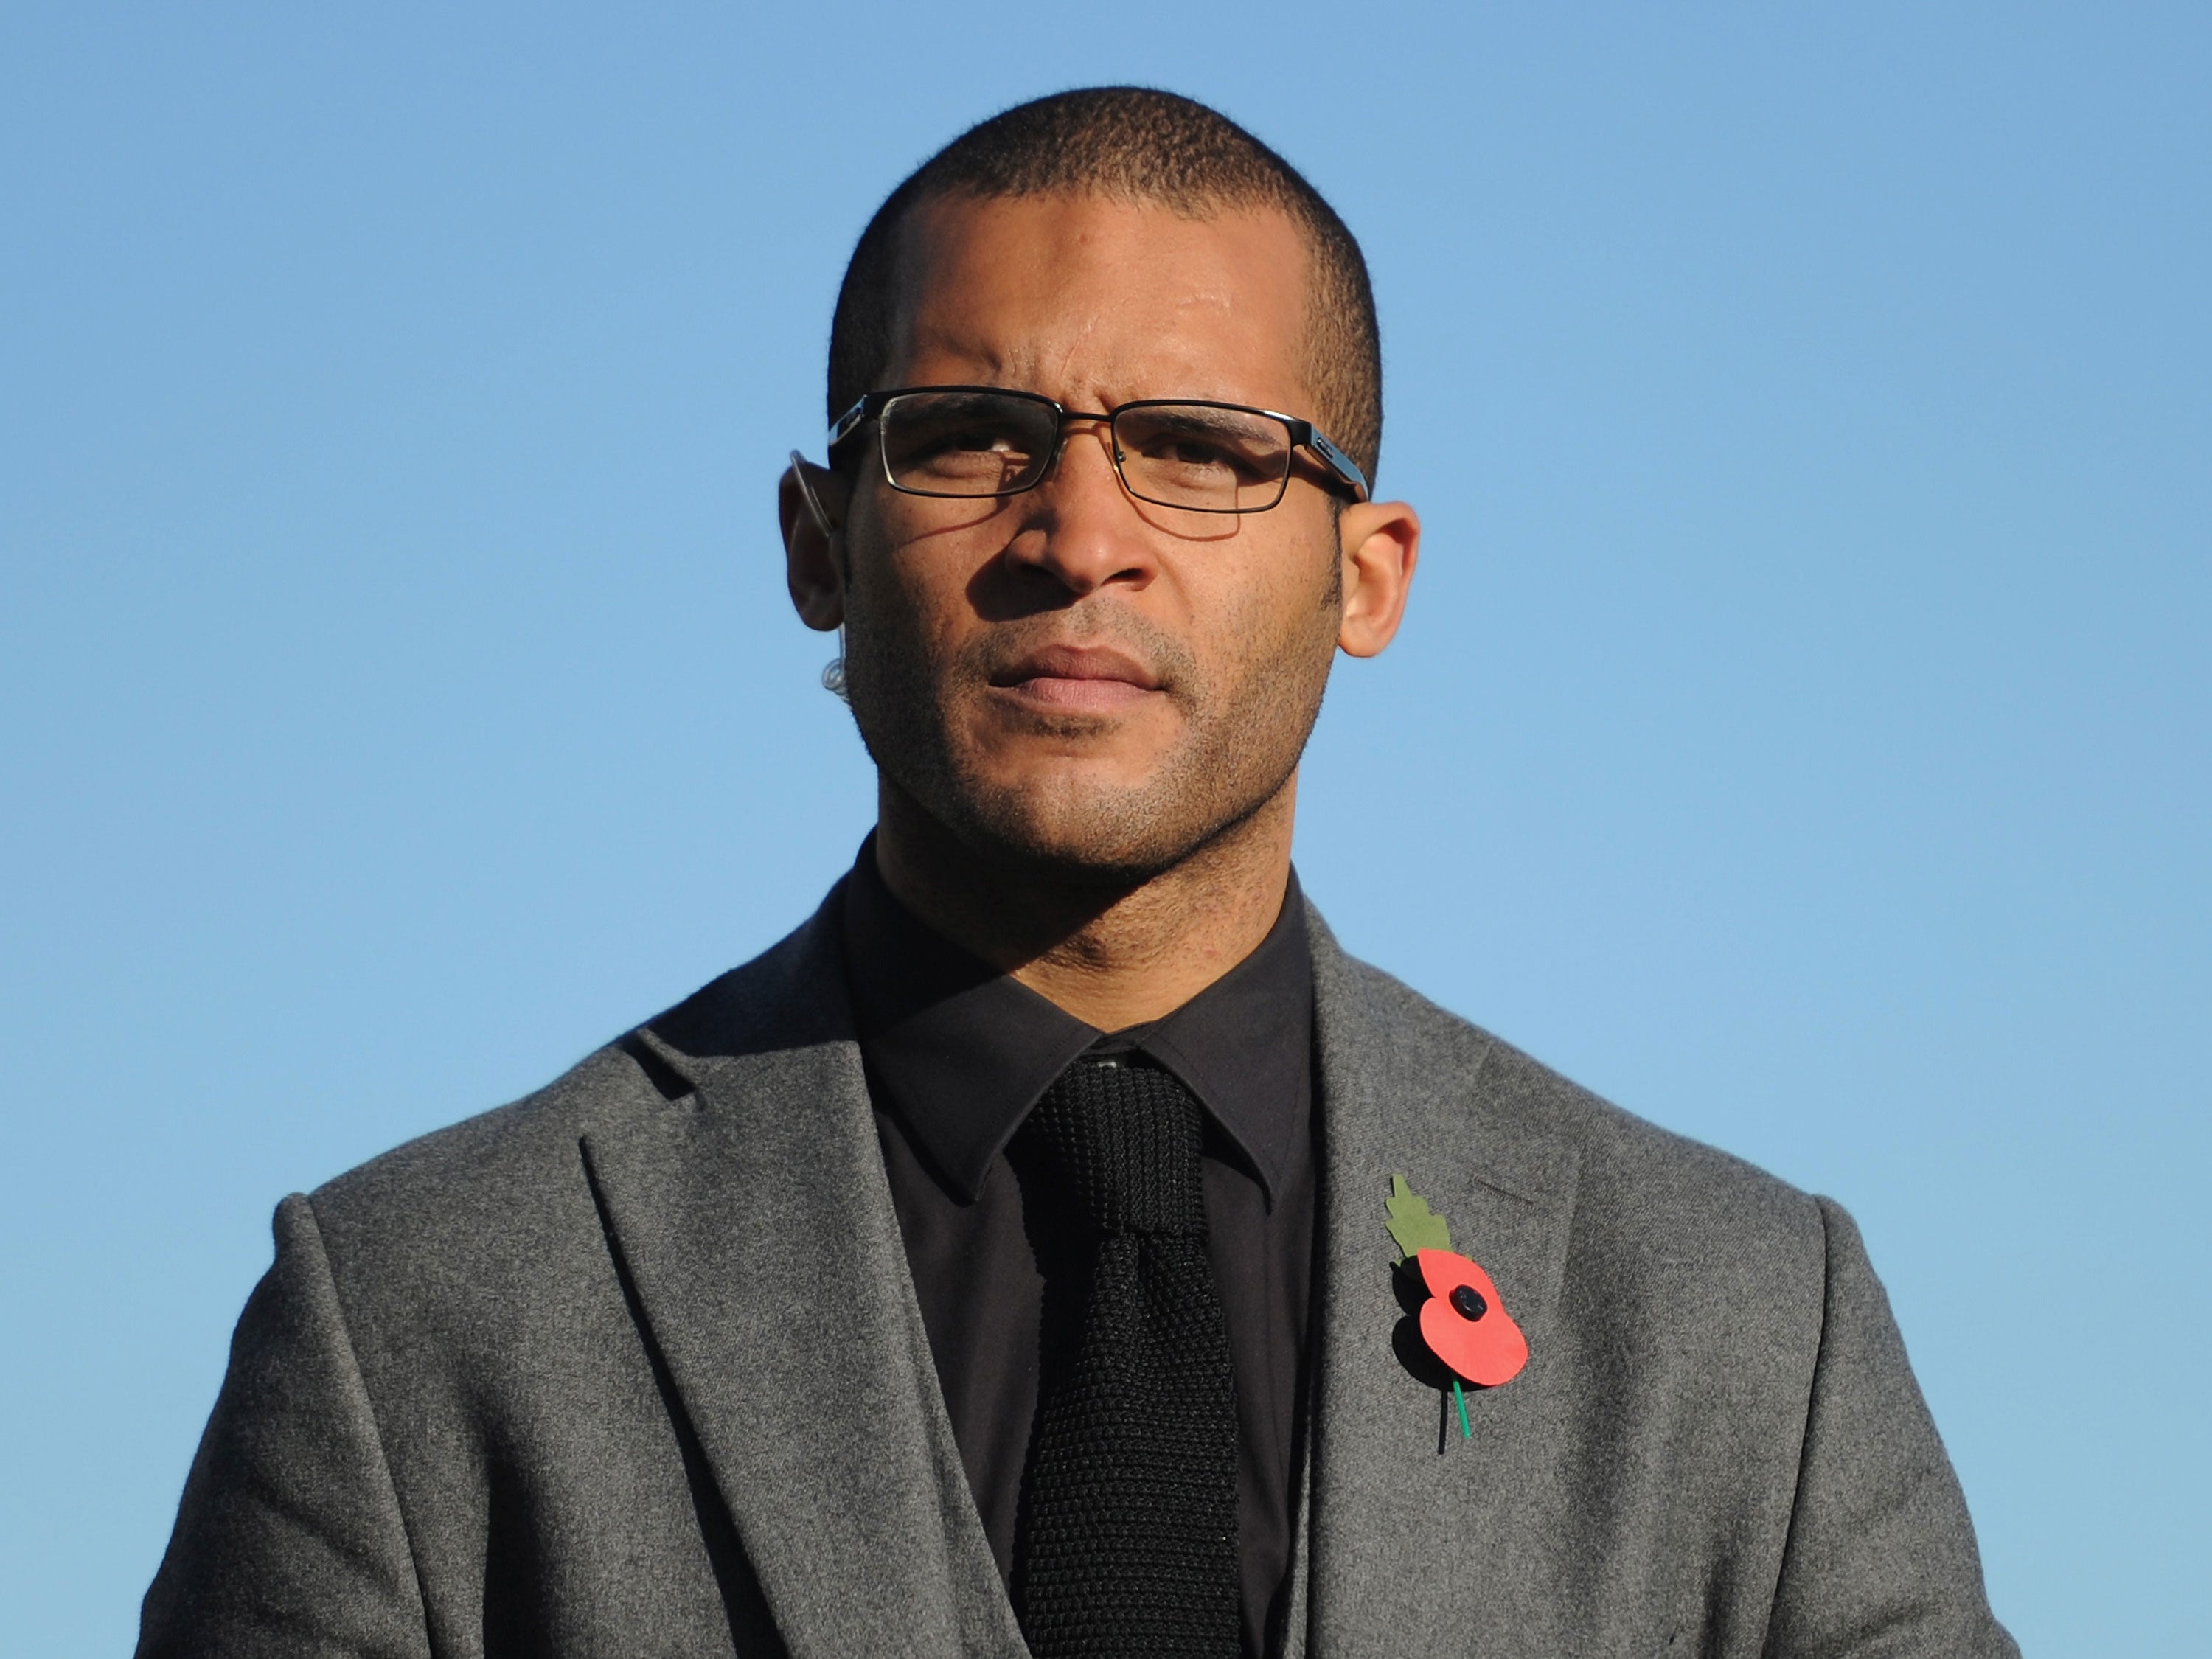 Clarke Carlisle has been hit by a lorry